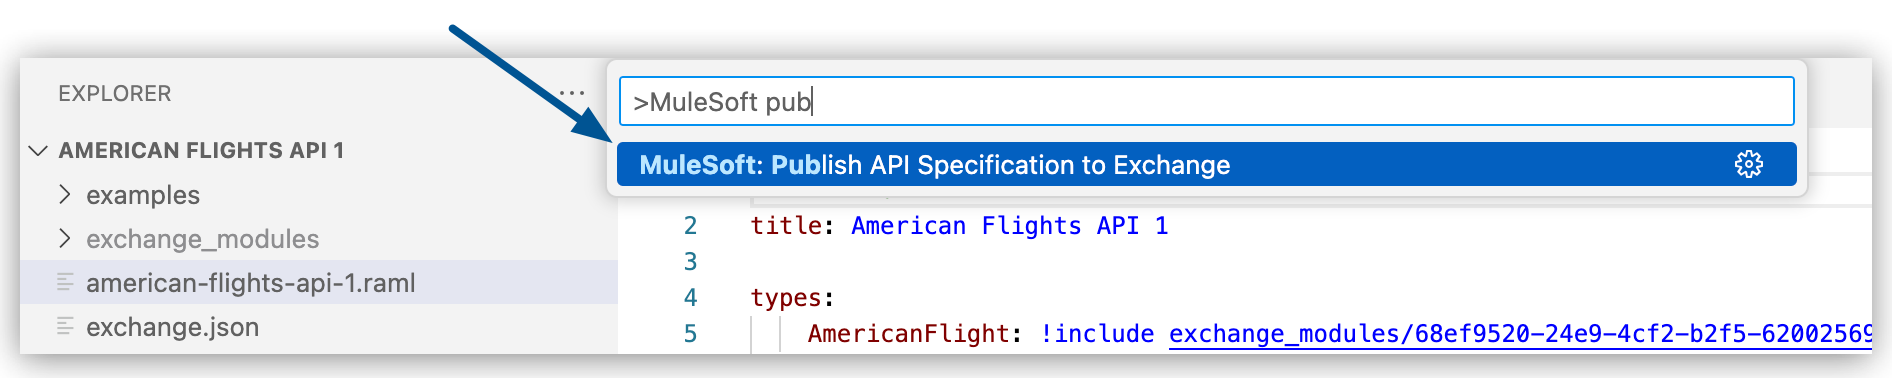 MuleSoft: Publish API Specification to Exchange highlighted in Command Palette